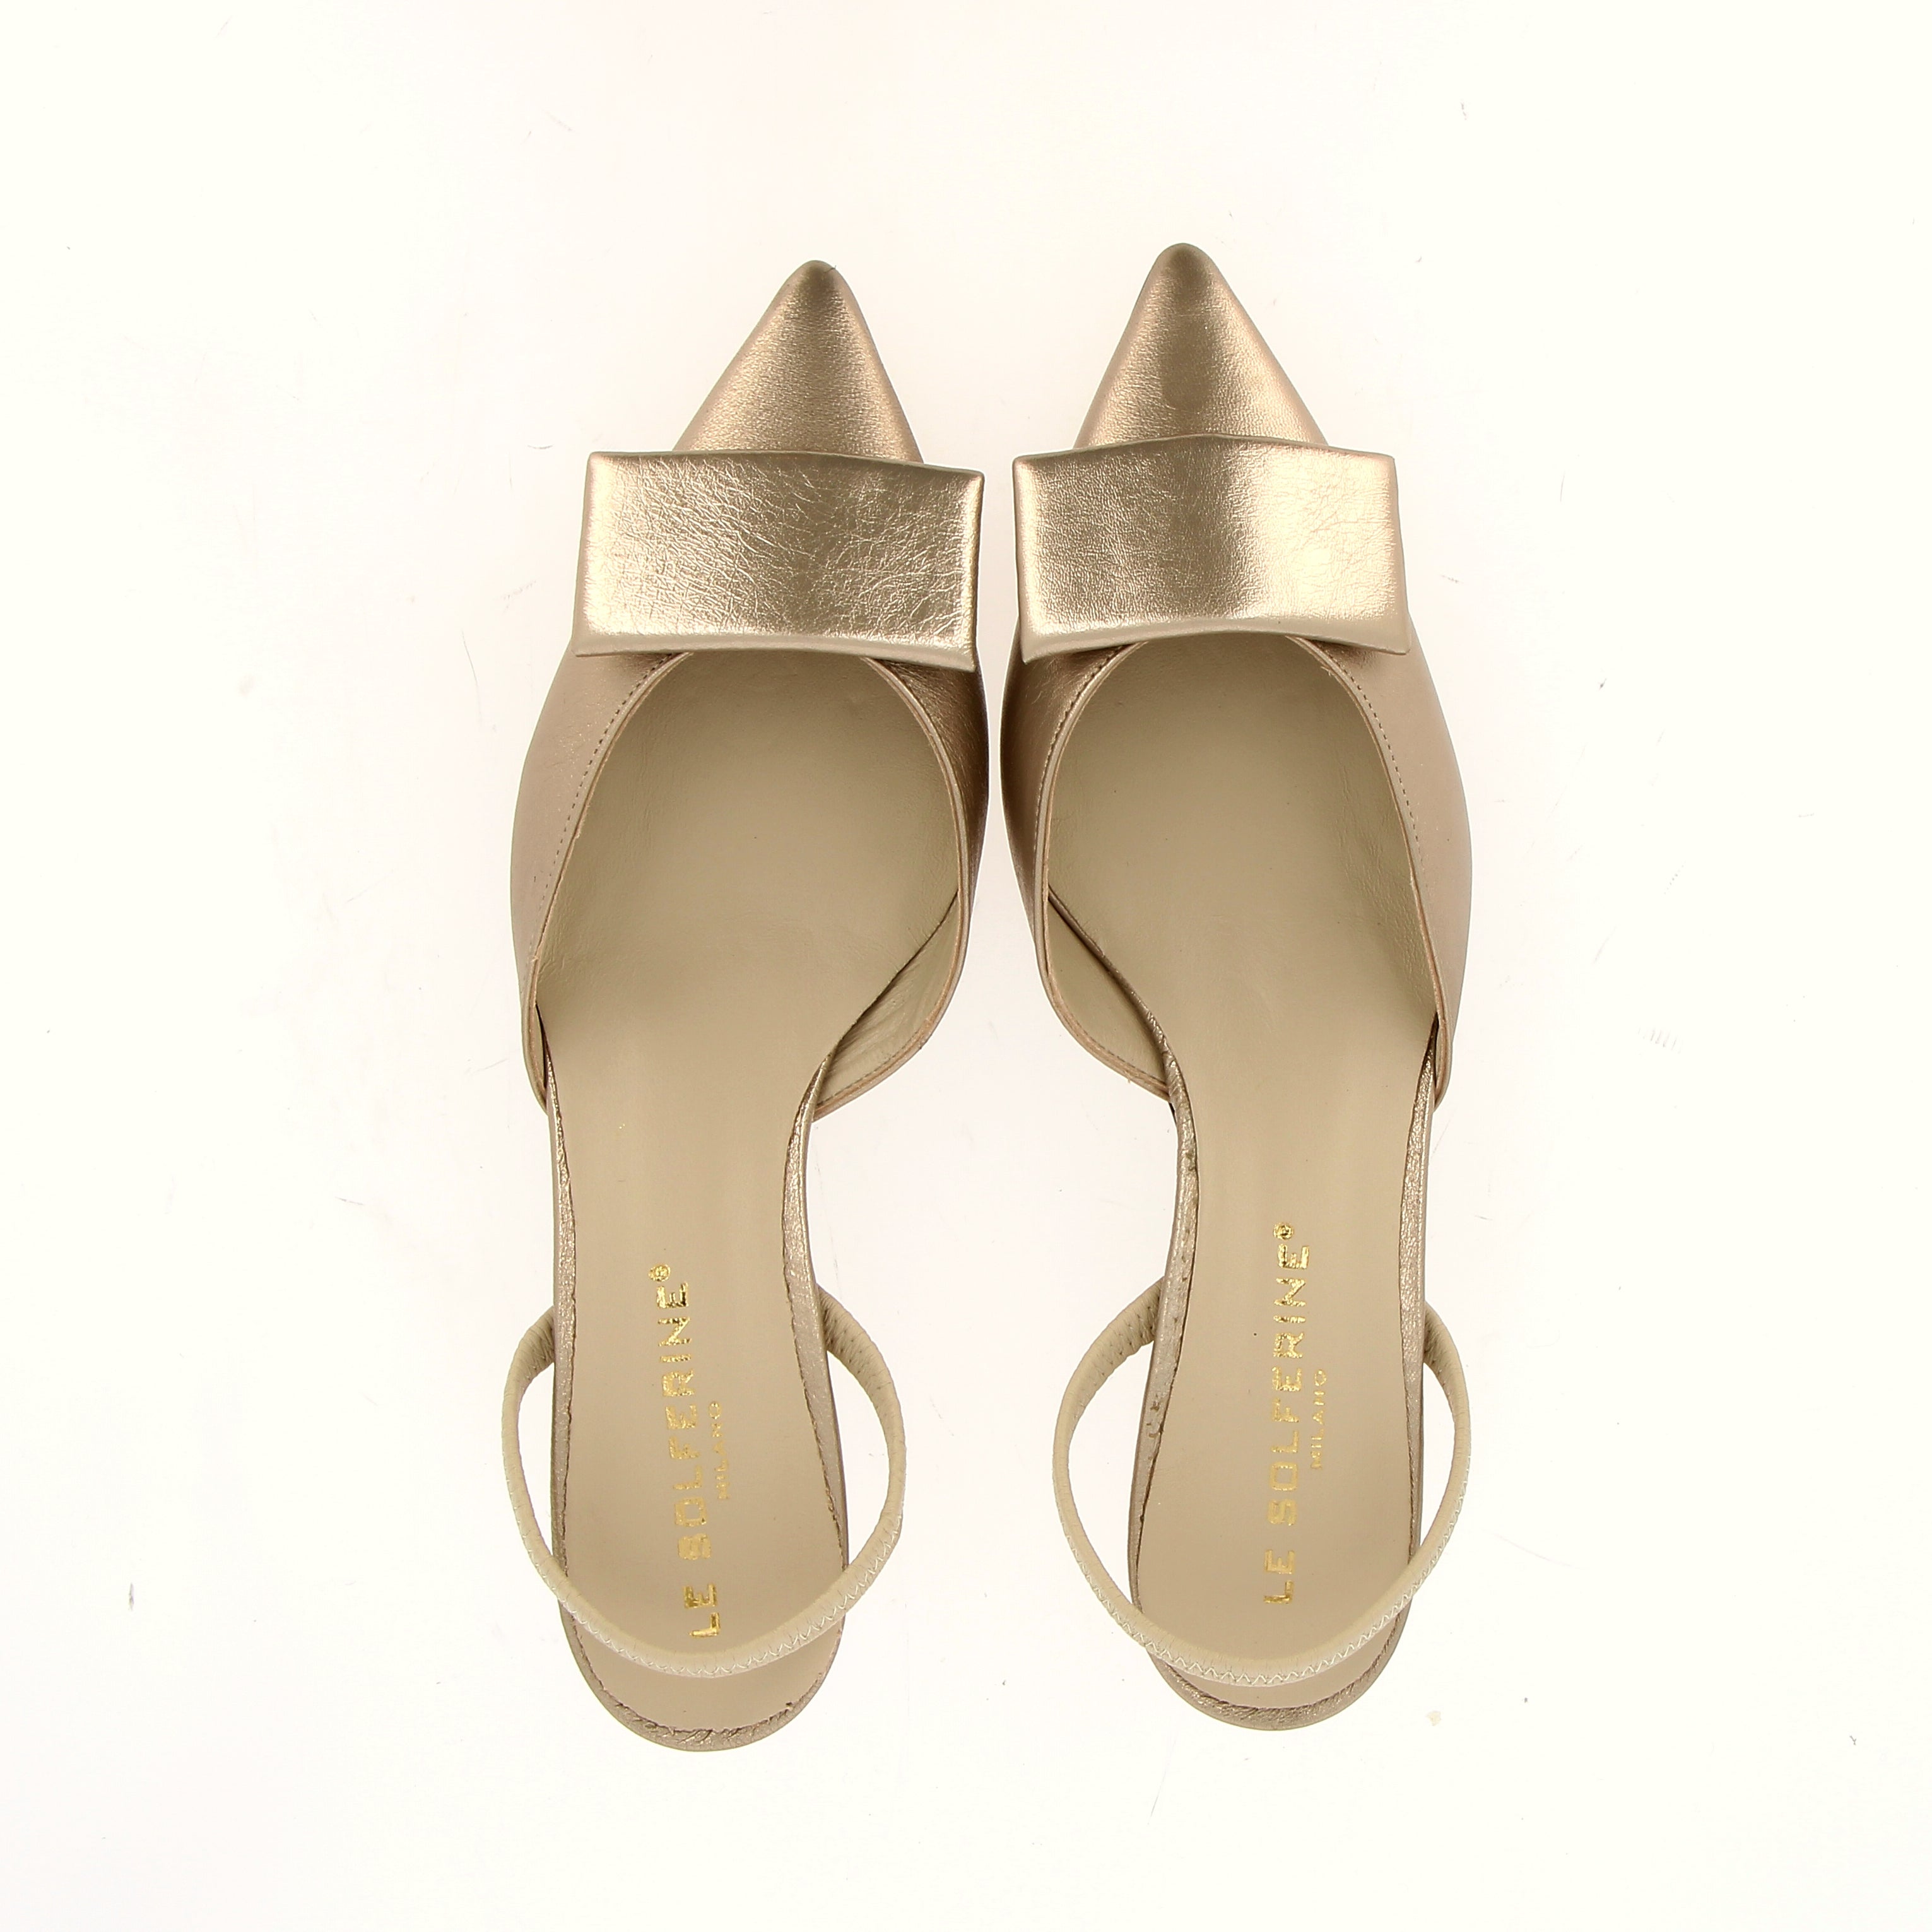 Sling back in unlined platinum nappa leather with low heel